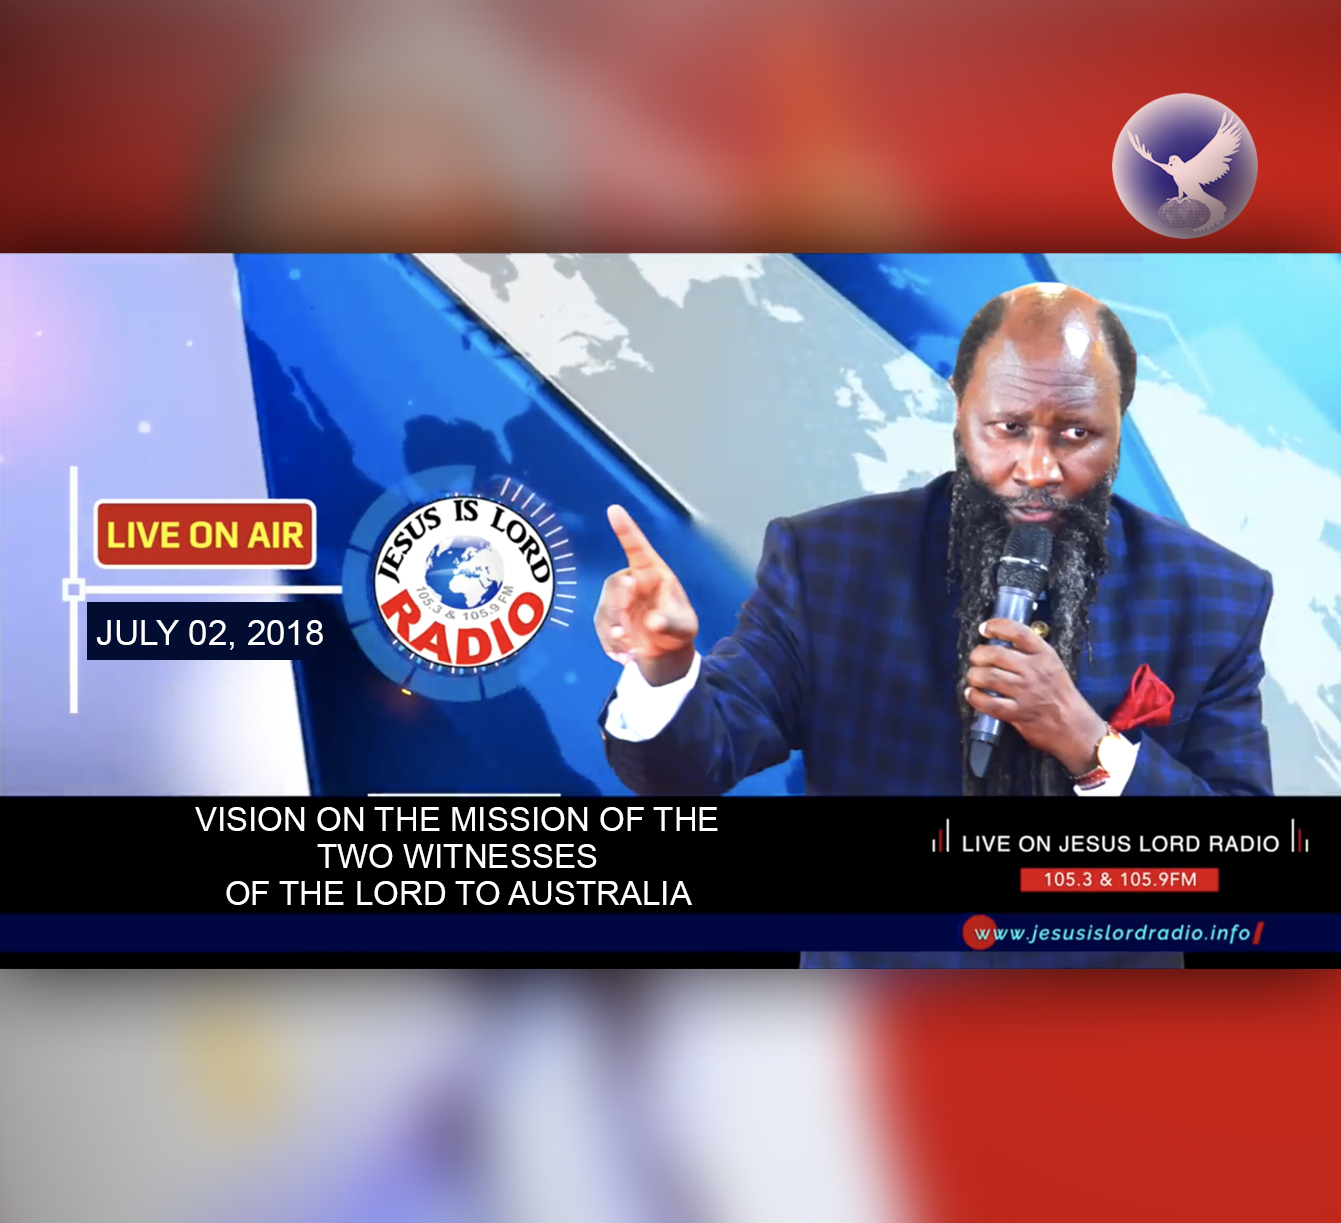 EPISODE 222 - VISION ON THE MISSION OF THE TWO WITNESSES OF THE LORD TO AUSTRALIA (02JUN2018) - PROPHET DR. OWUOR